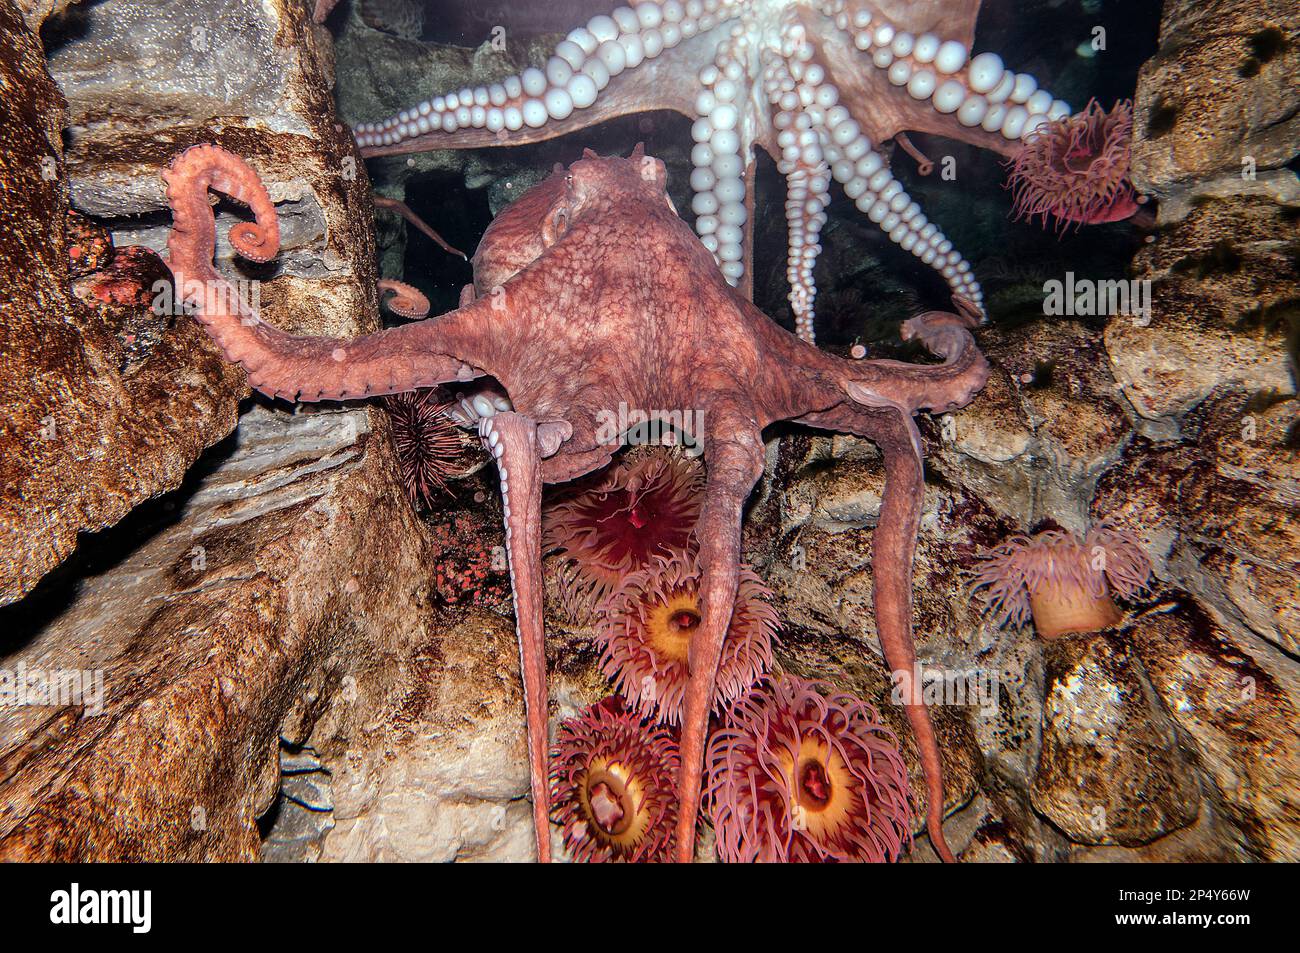 Giant pacific octopus full body view, 2 shot Stock Photo